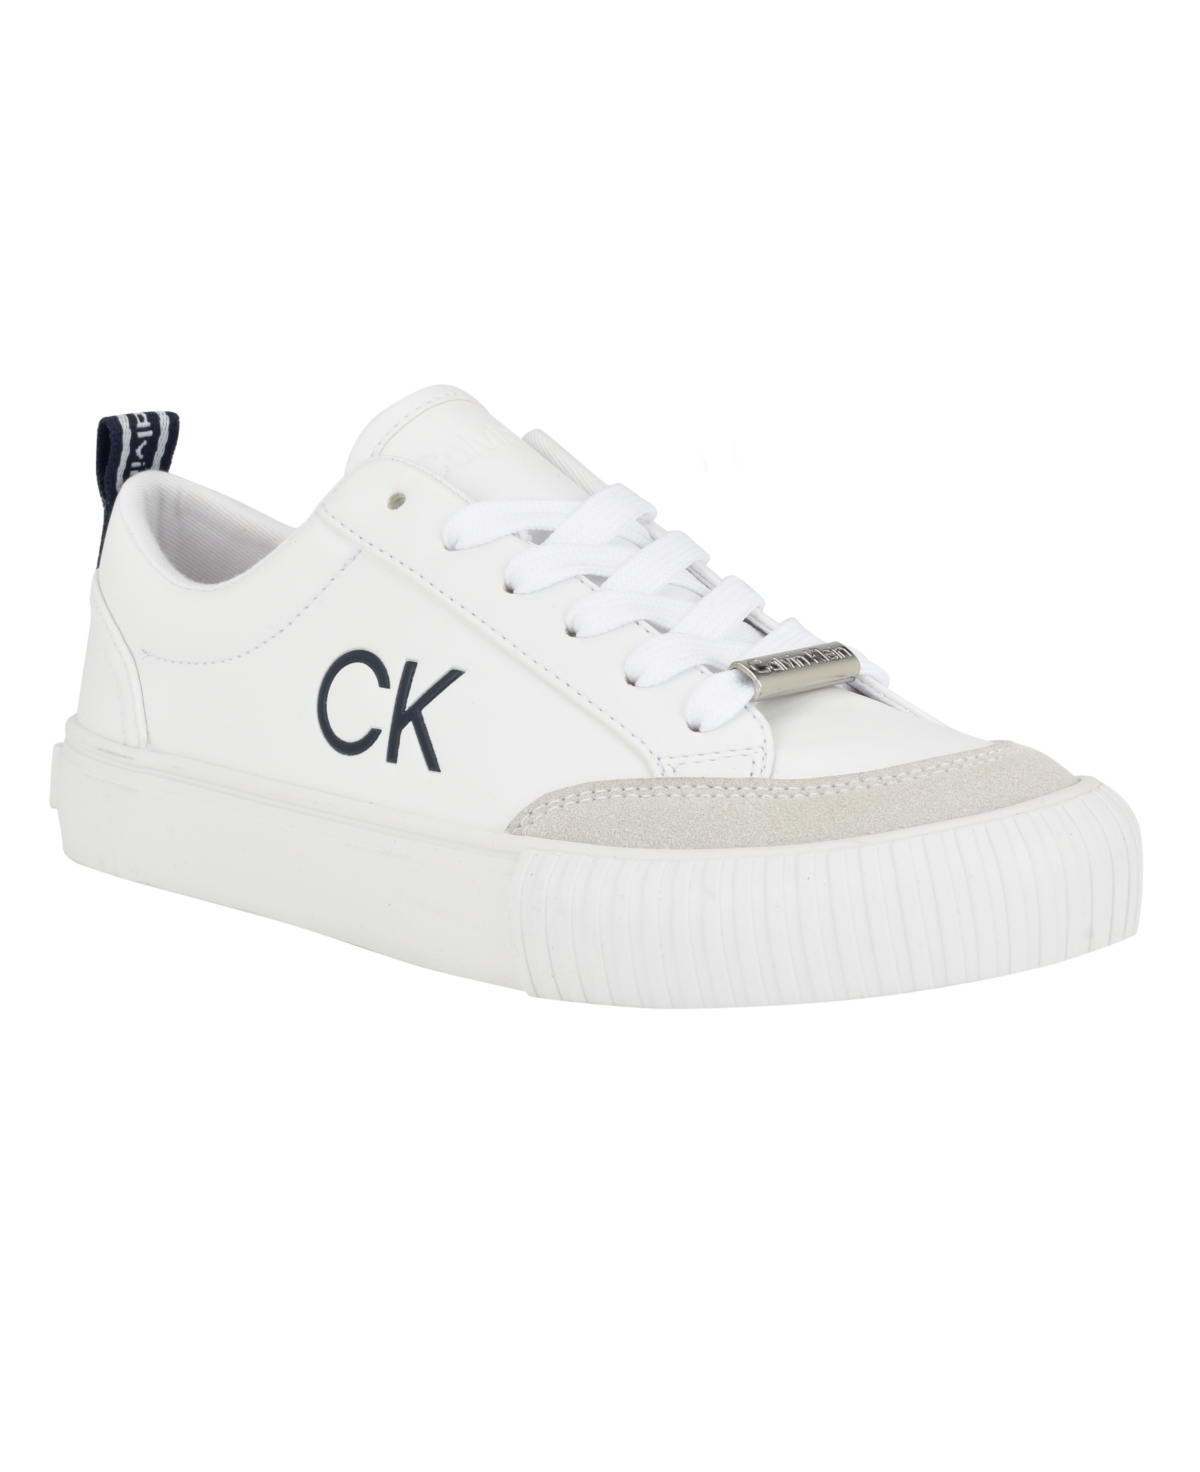 Calvin Klein Women's Lariss Round Toe Lace-up Casual Sneakers In White Multi - Manmade And Suede